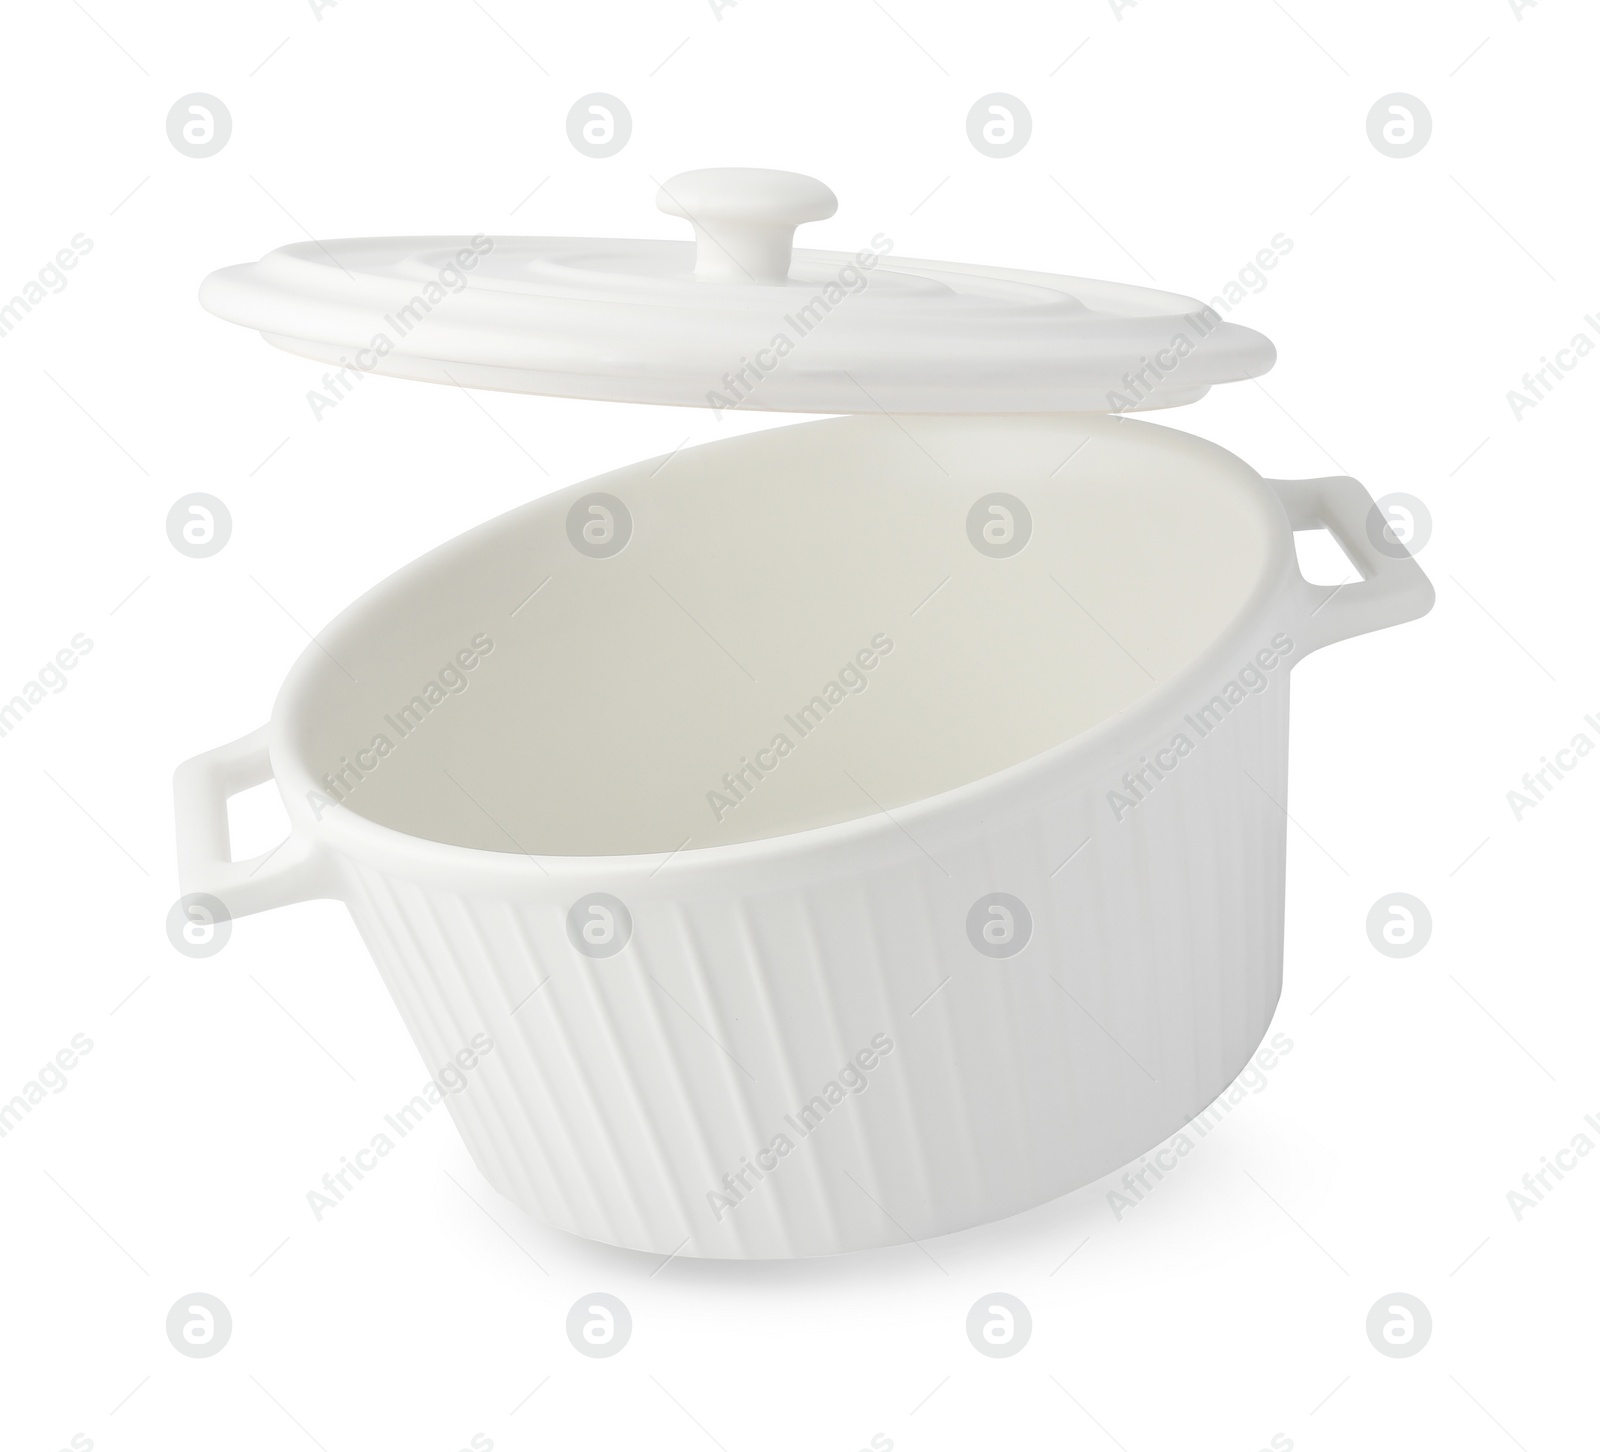 Photo of One empty ceramic pot with lid isolated on white